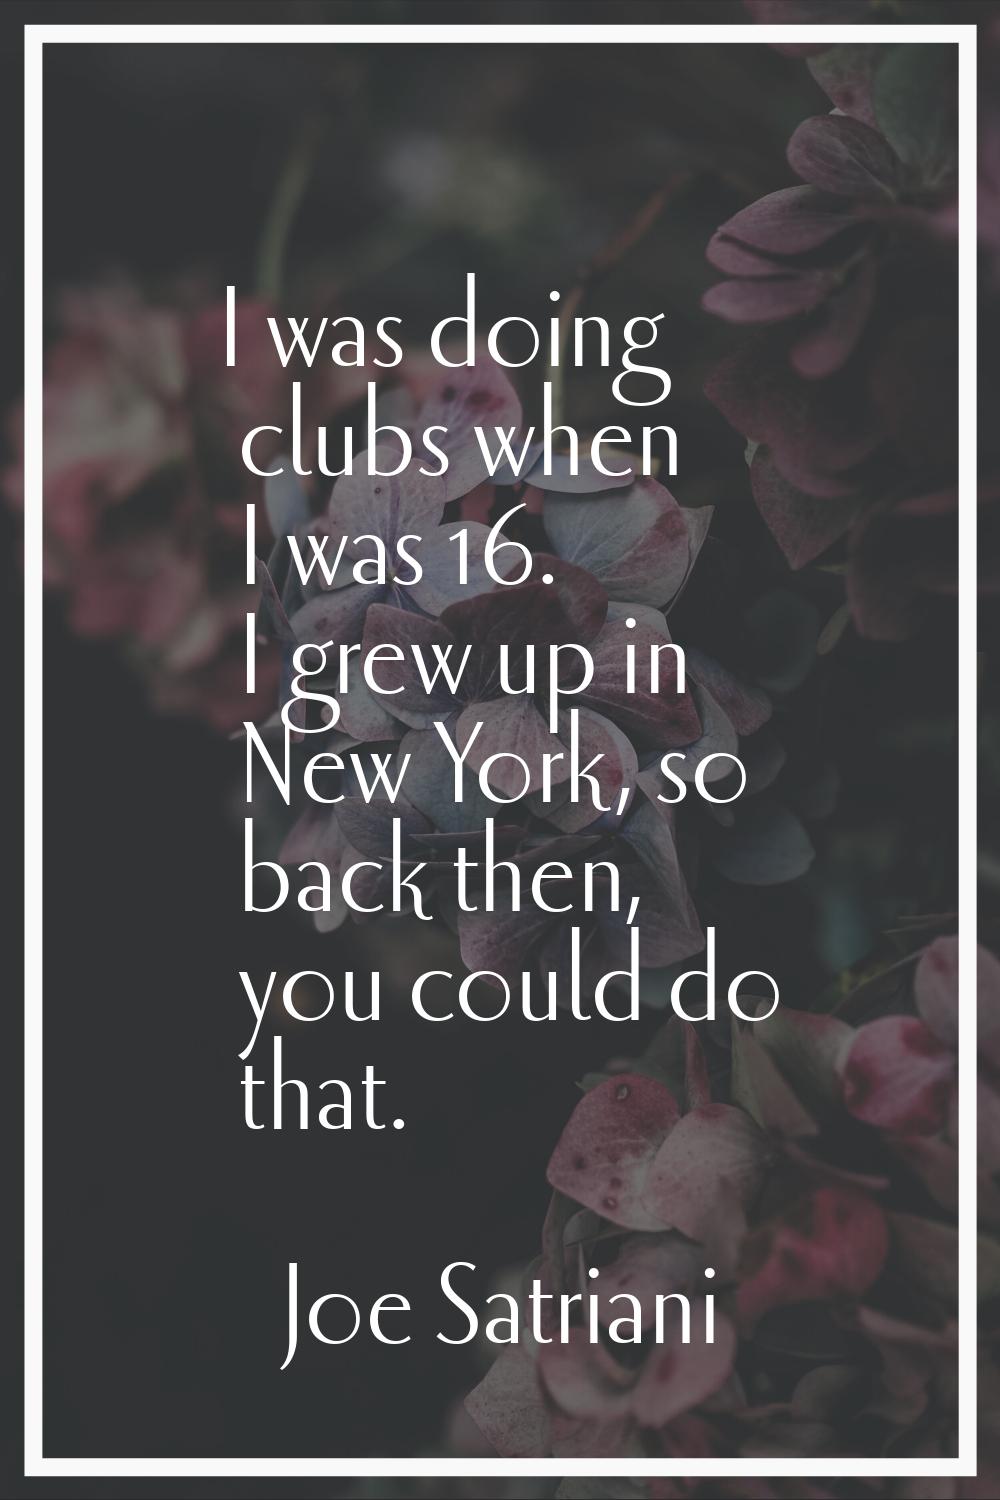 I was doing clubs when I was 16. I grew up in New York, so back then, you could do that.